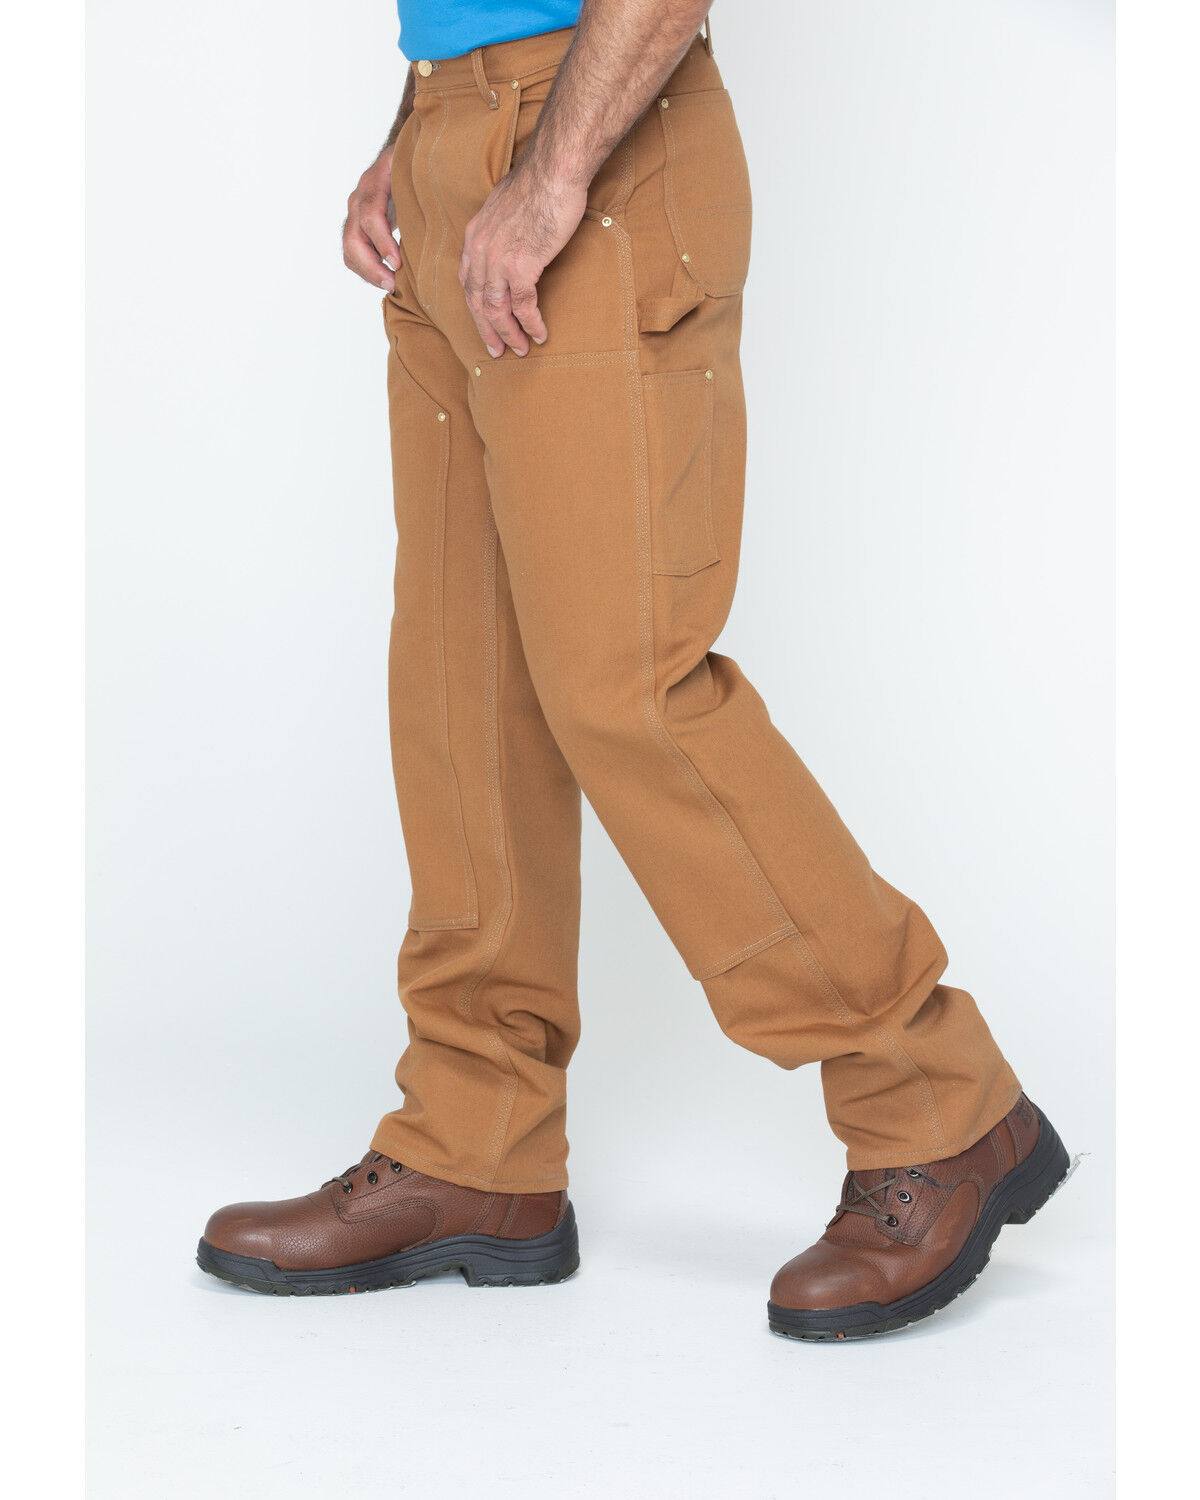 Carhartt Double Duck Dungaree Fit Khaki Work Jeans 